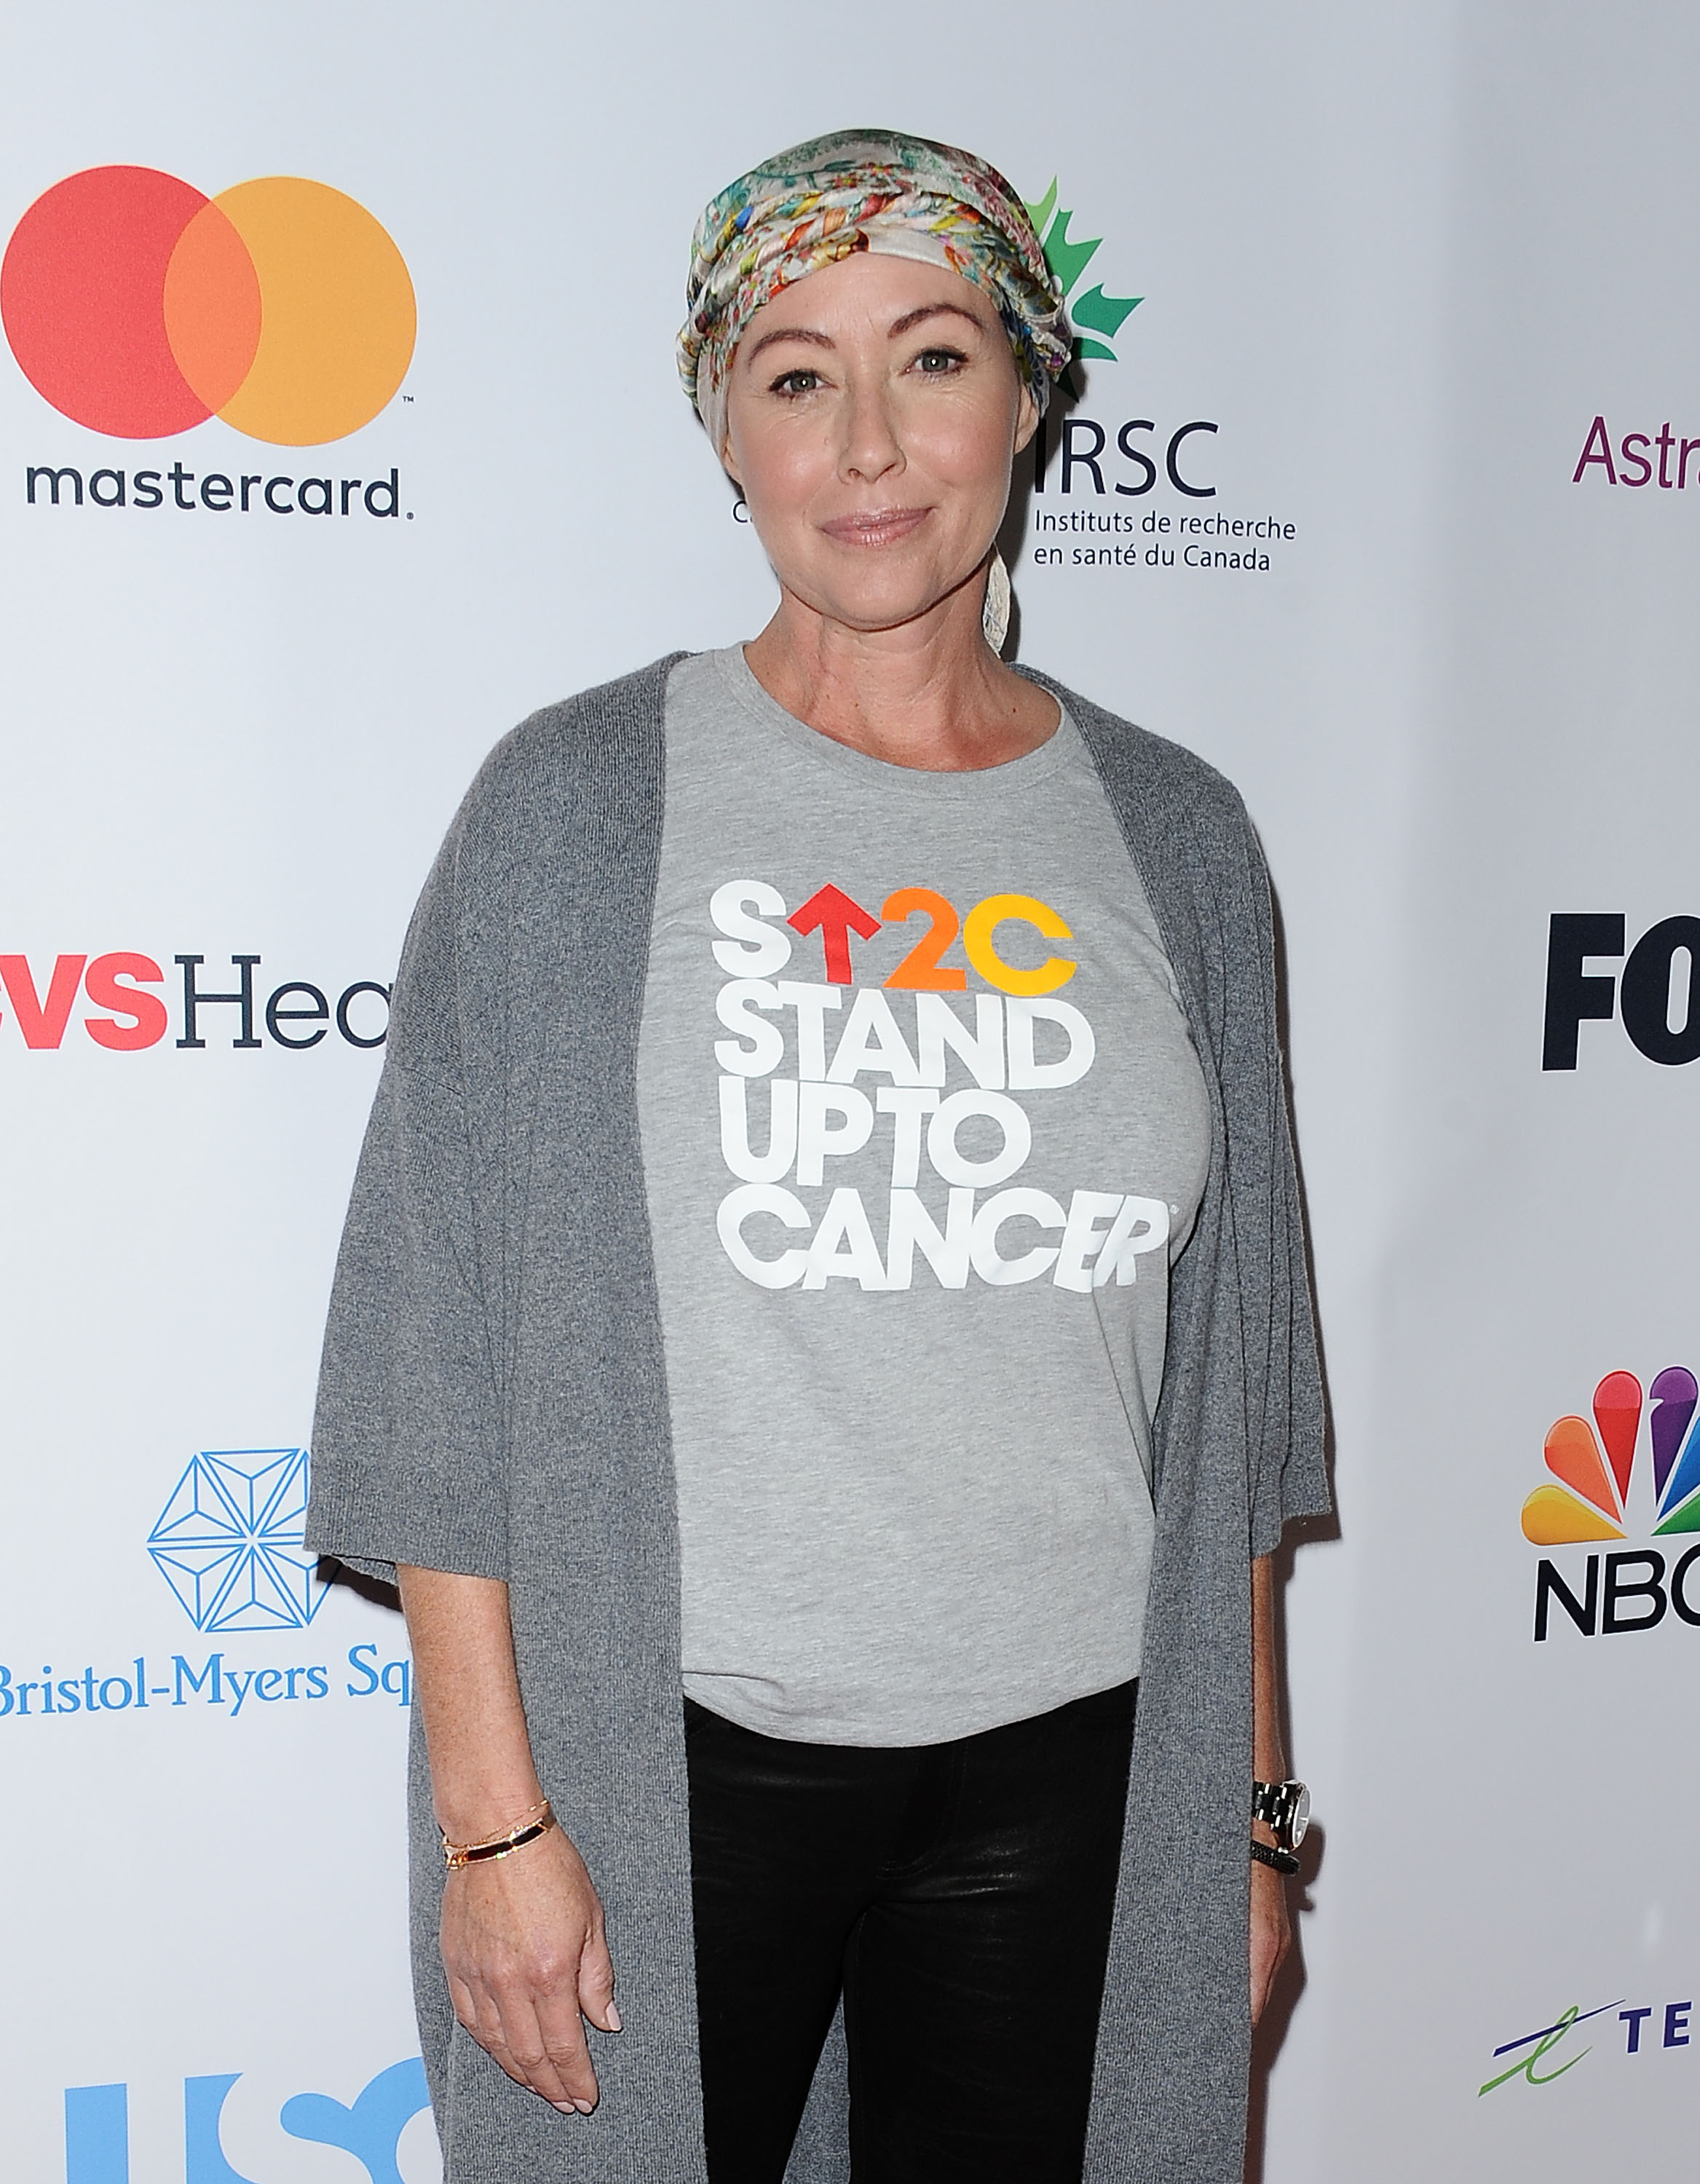 Shannen Doherty at the 5th Biennial Stand Up To Cancer event in Los Angeles, California on September 9, 2016 | Source: Getty Images